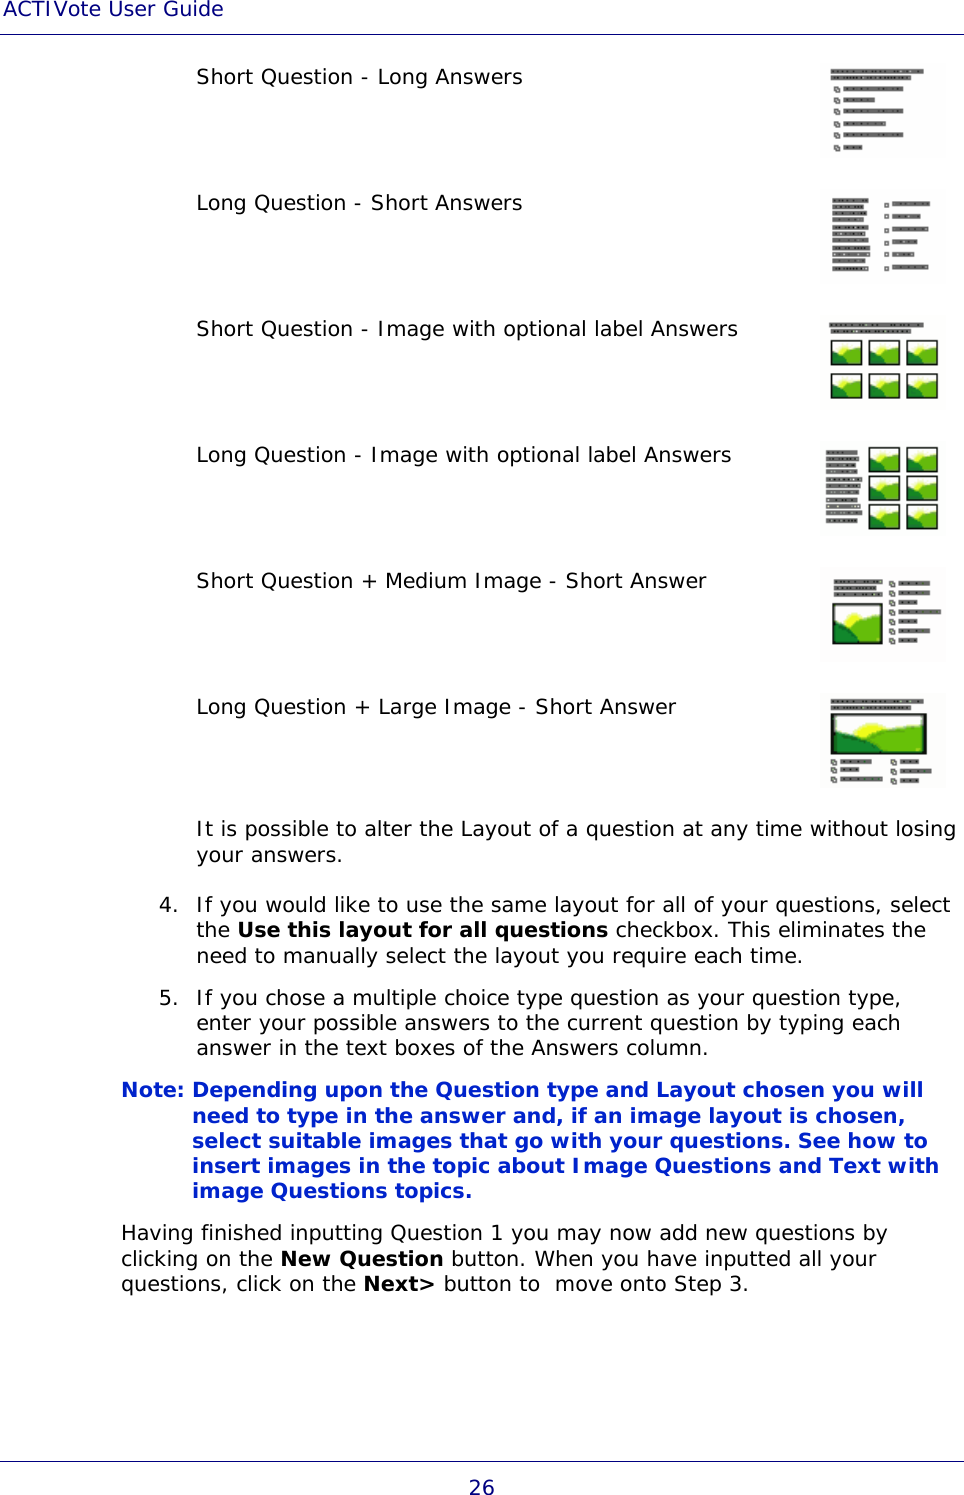 ACTIVote User Guide 26 Short Question - Long Answers  Long Question - Short Answers  Short Question - Image with optional label Answers  Long Question - Image with optional label Answers  Short Question + Medium Image - Short Answer  Long Question + Large Image - Short Answer  It is possible to alter the Layout of a question at any time without losing your answers. 4. If you would like to use the same layout for all of your questions, select the Use this layout for all questions checkbox. This eliminates the need to manually select the layout you require each time. 5. If you chose a multiple choice type question as your question type, enter your possible answers to the current question by typing each answer in the text boxes of the Answers column. Note: Depending upon the Question type and Layout chosen you will need to type in the answer and, if an image layout is chosen, select suitable images that go with your questions. See how to insert images in the topic about Image Questions and Text with image Questions topics. Having finished inputting Question 1 you may now add new questions by clicking on the New Question button. When you have inputted all your questions, click on the Next&gt; button to  move onto Step 3. 